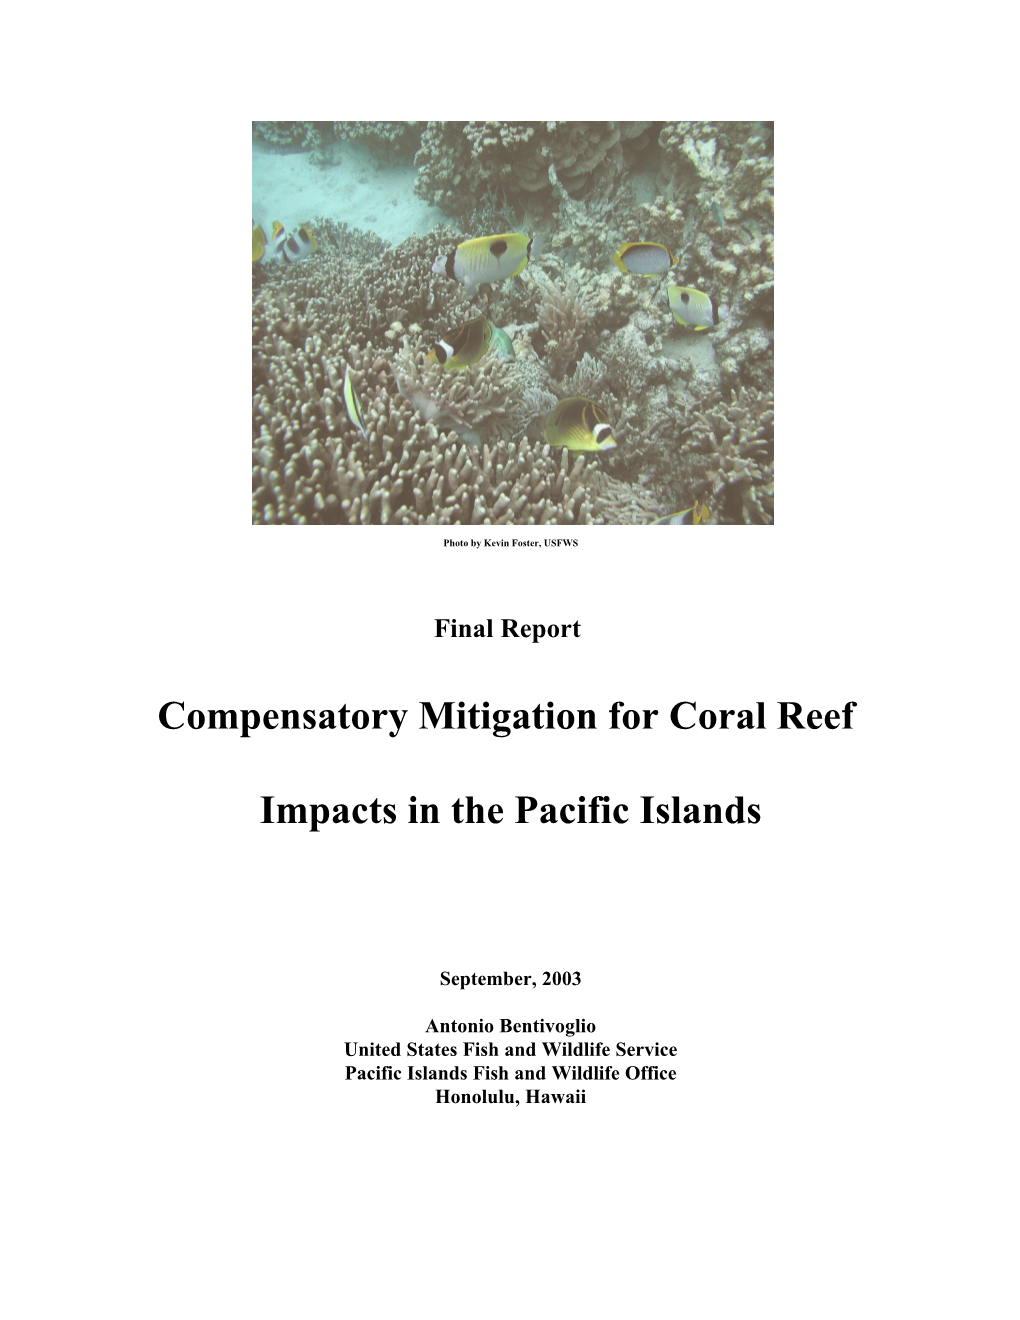 Compensatory Mitigation for Coral Reef Impacts in the Pacific Islands